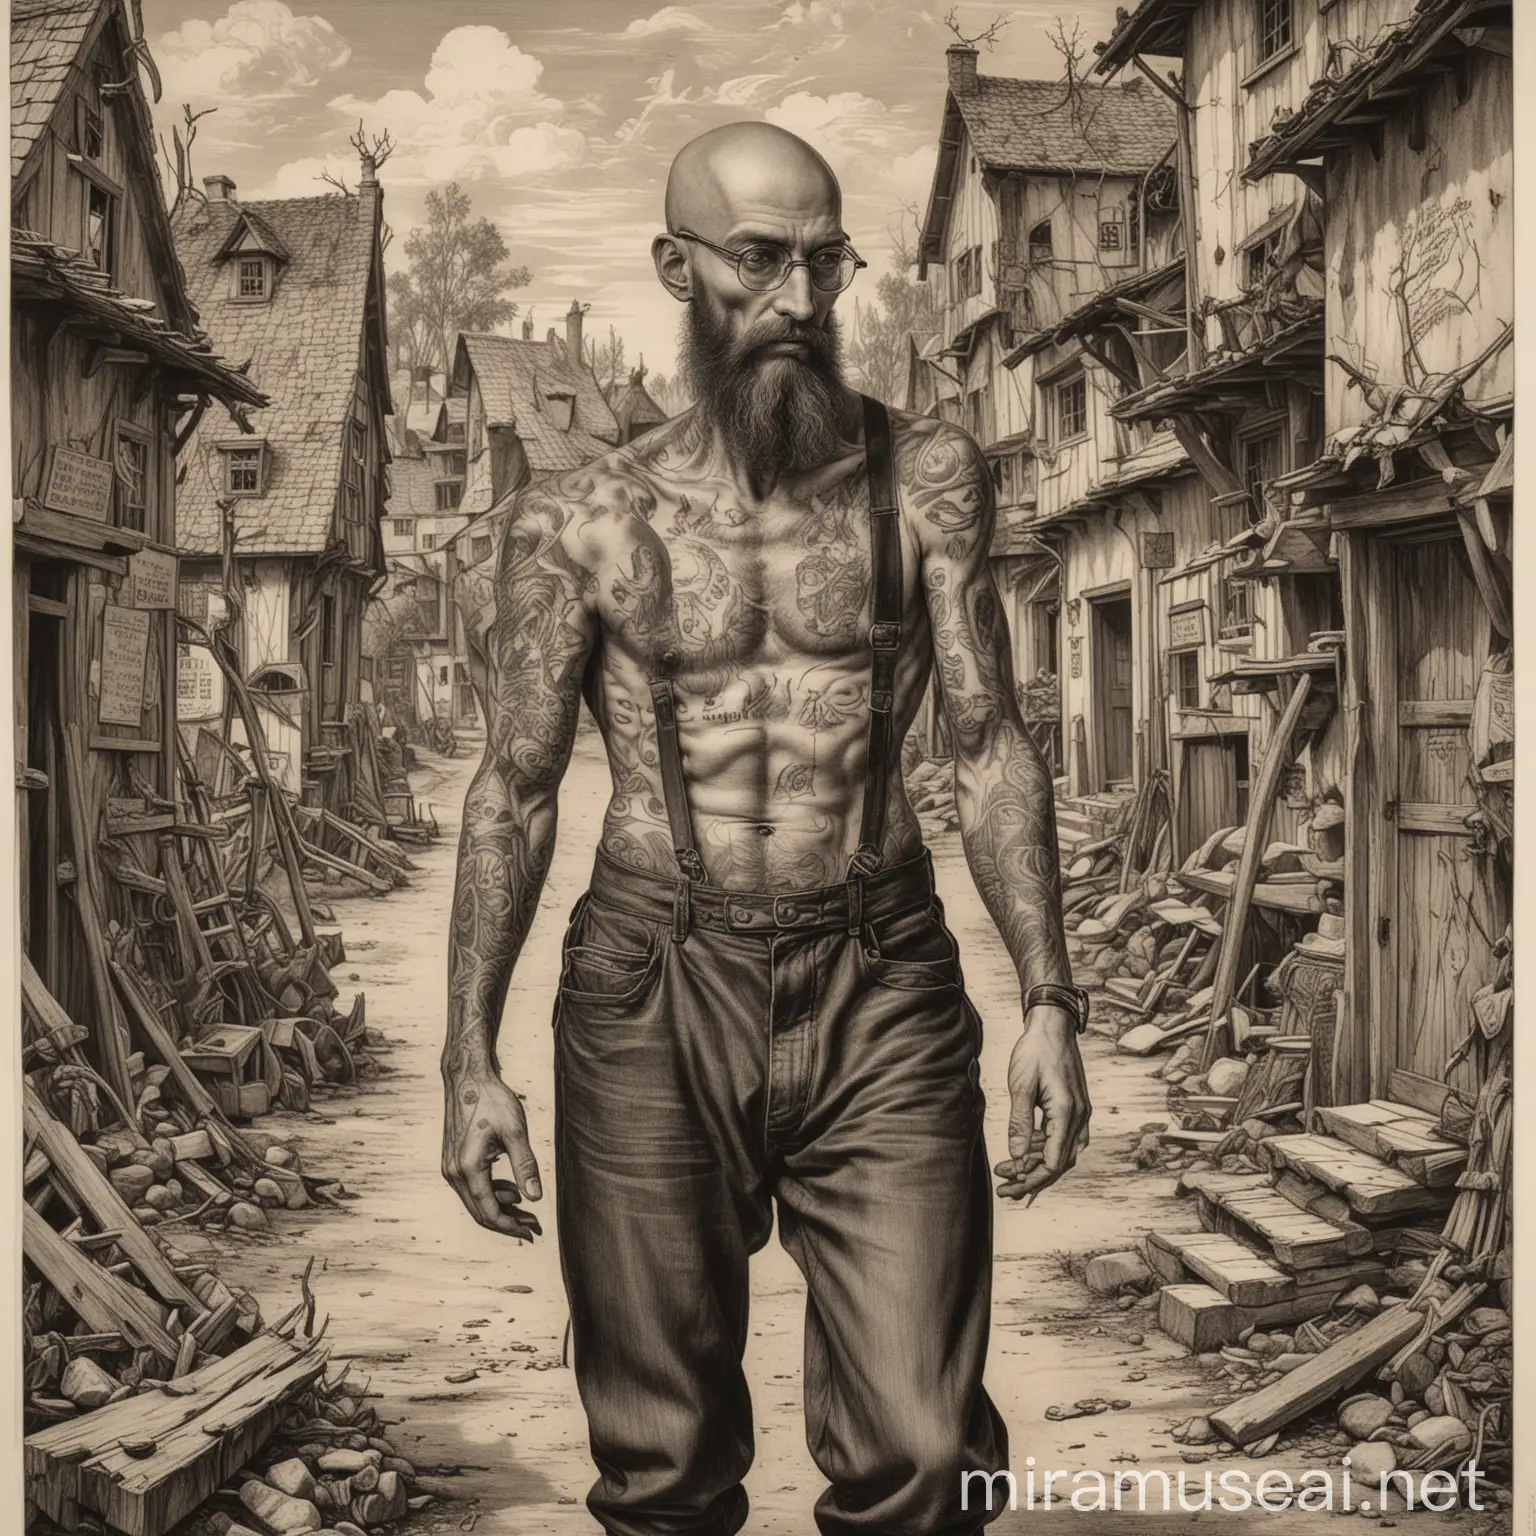 Chaos Unleashed Tattooed Man Rampages Through Village